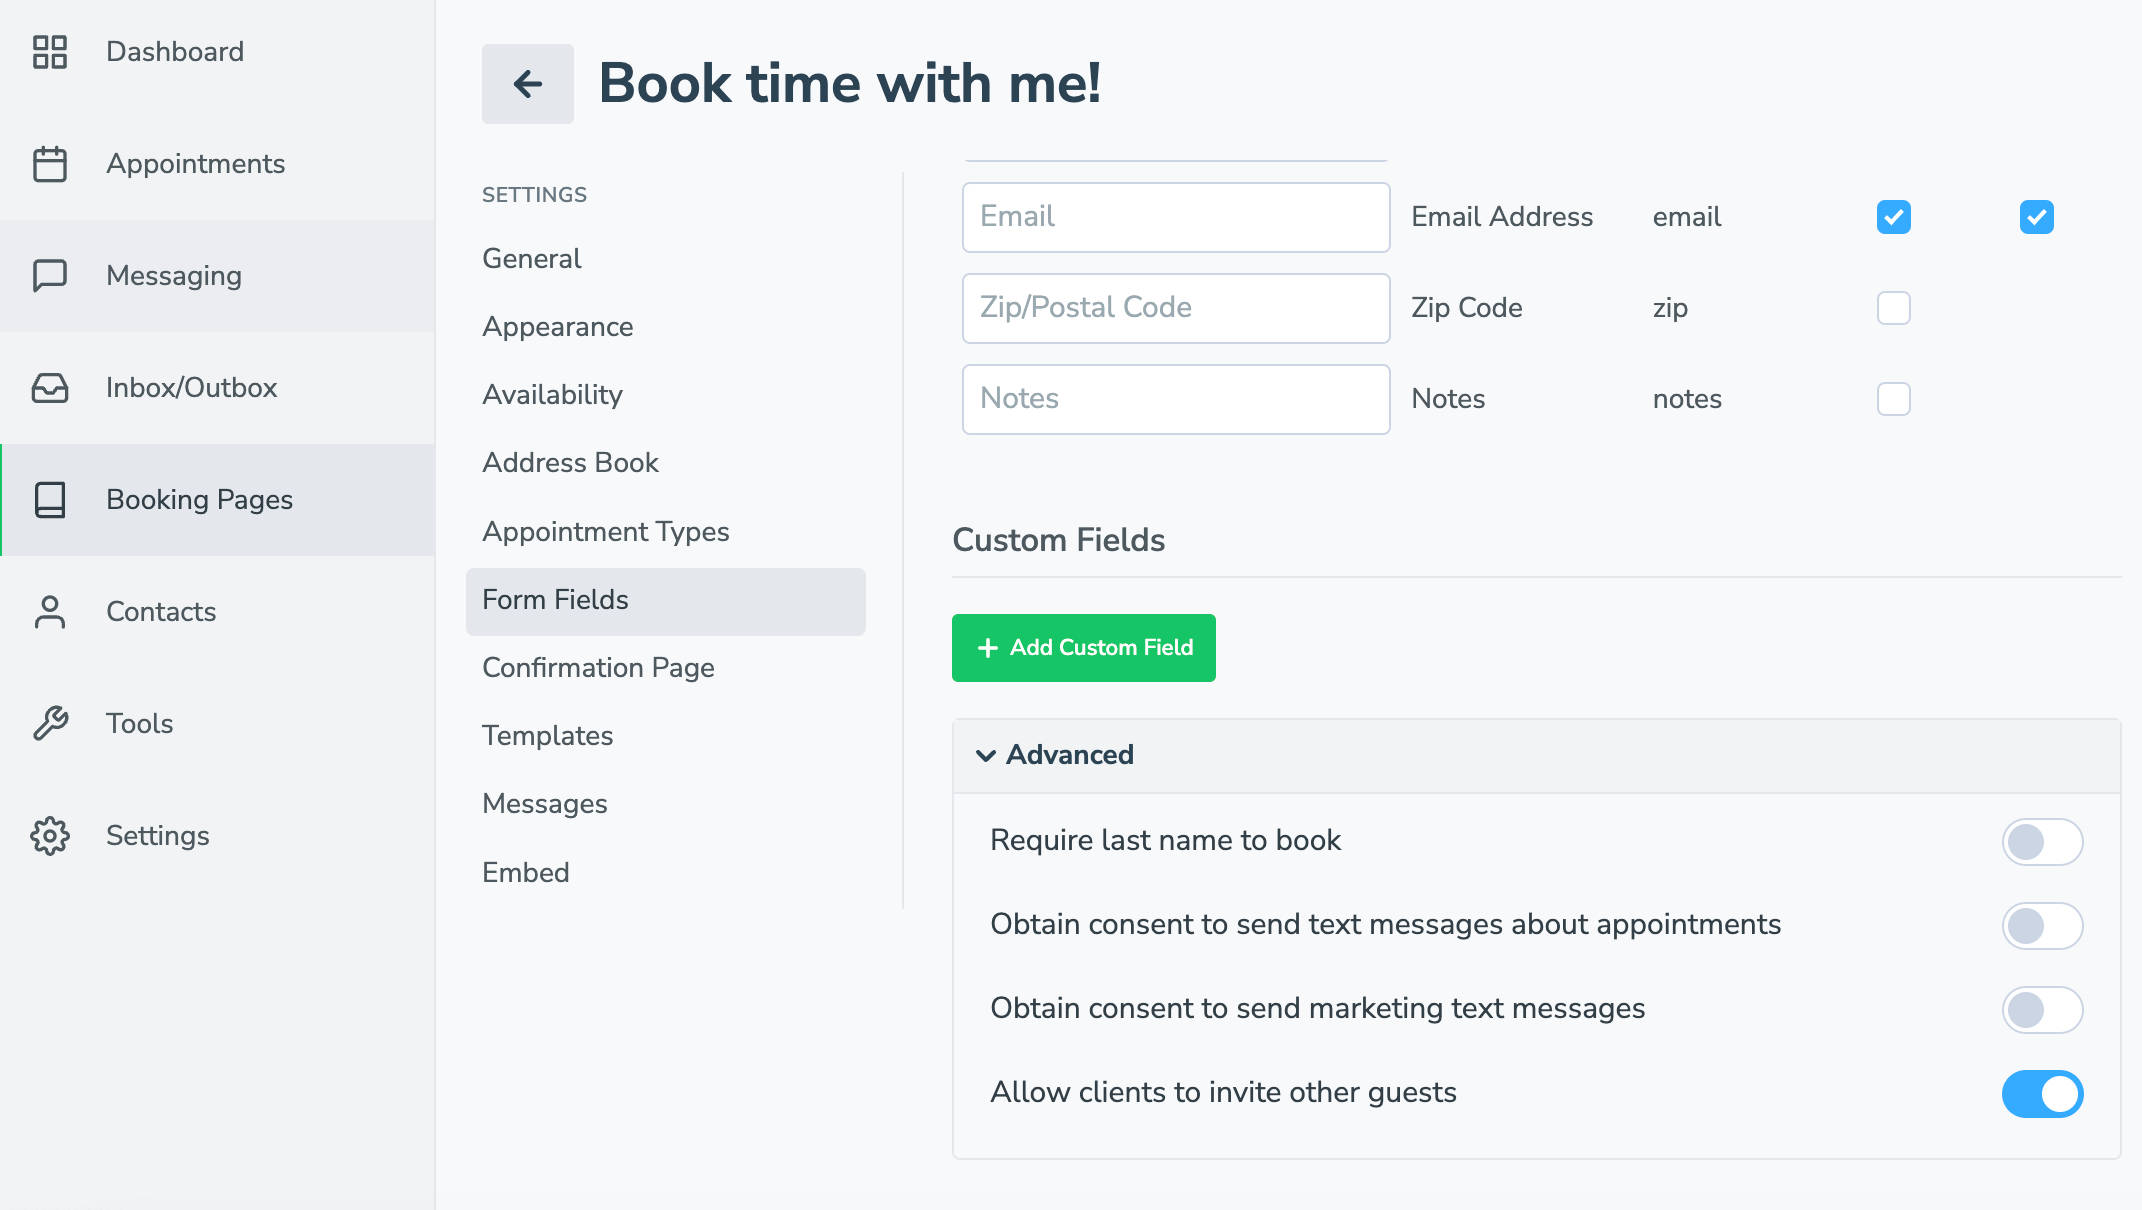 Enable clients booking with you to invite other guests